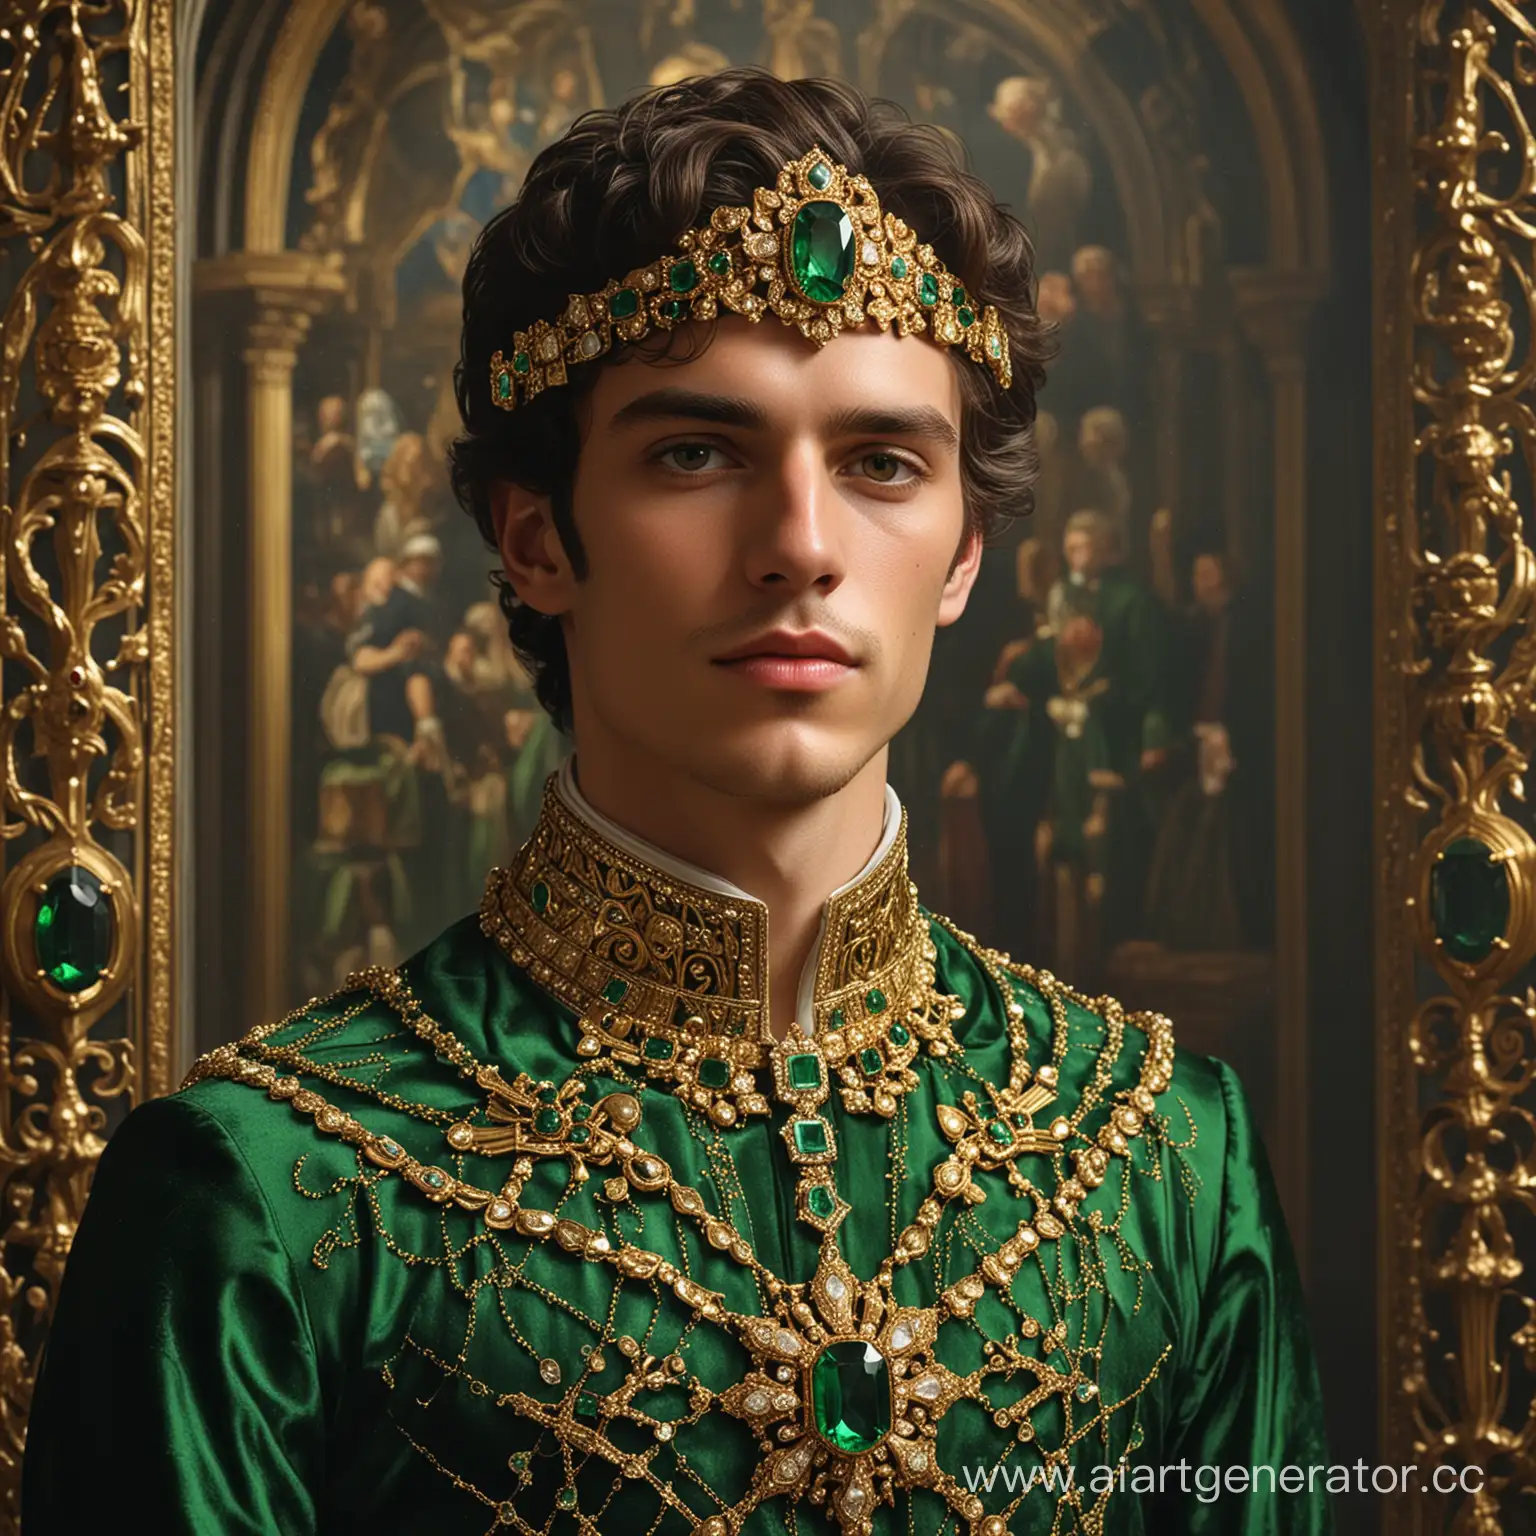 Young-Aristocrat-in-Opulent-Medieval-Attire-with-Emerald-Adornments